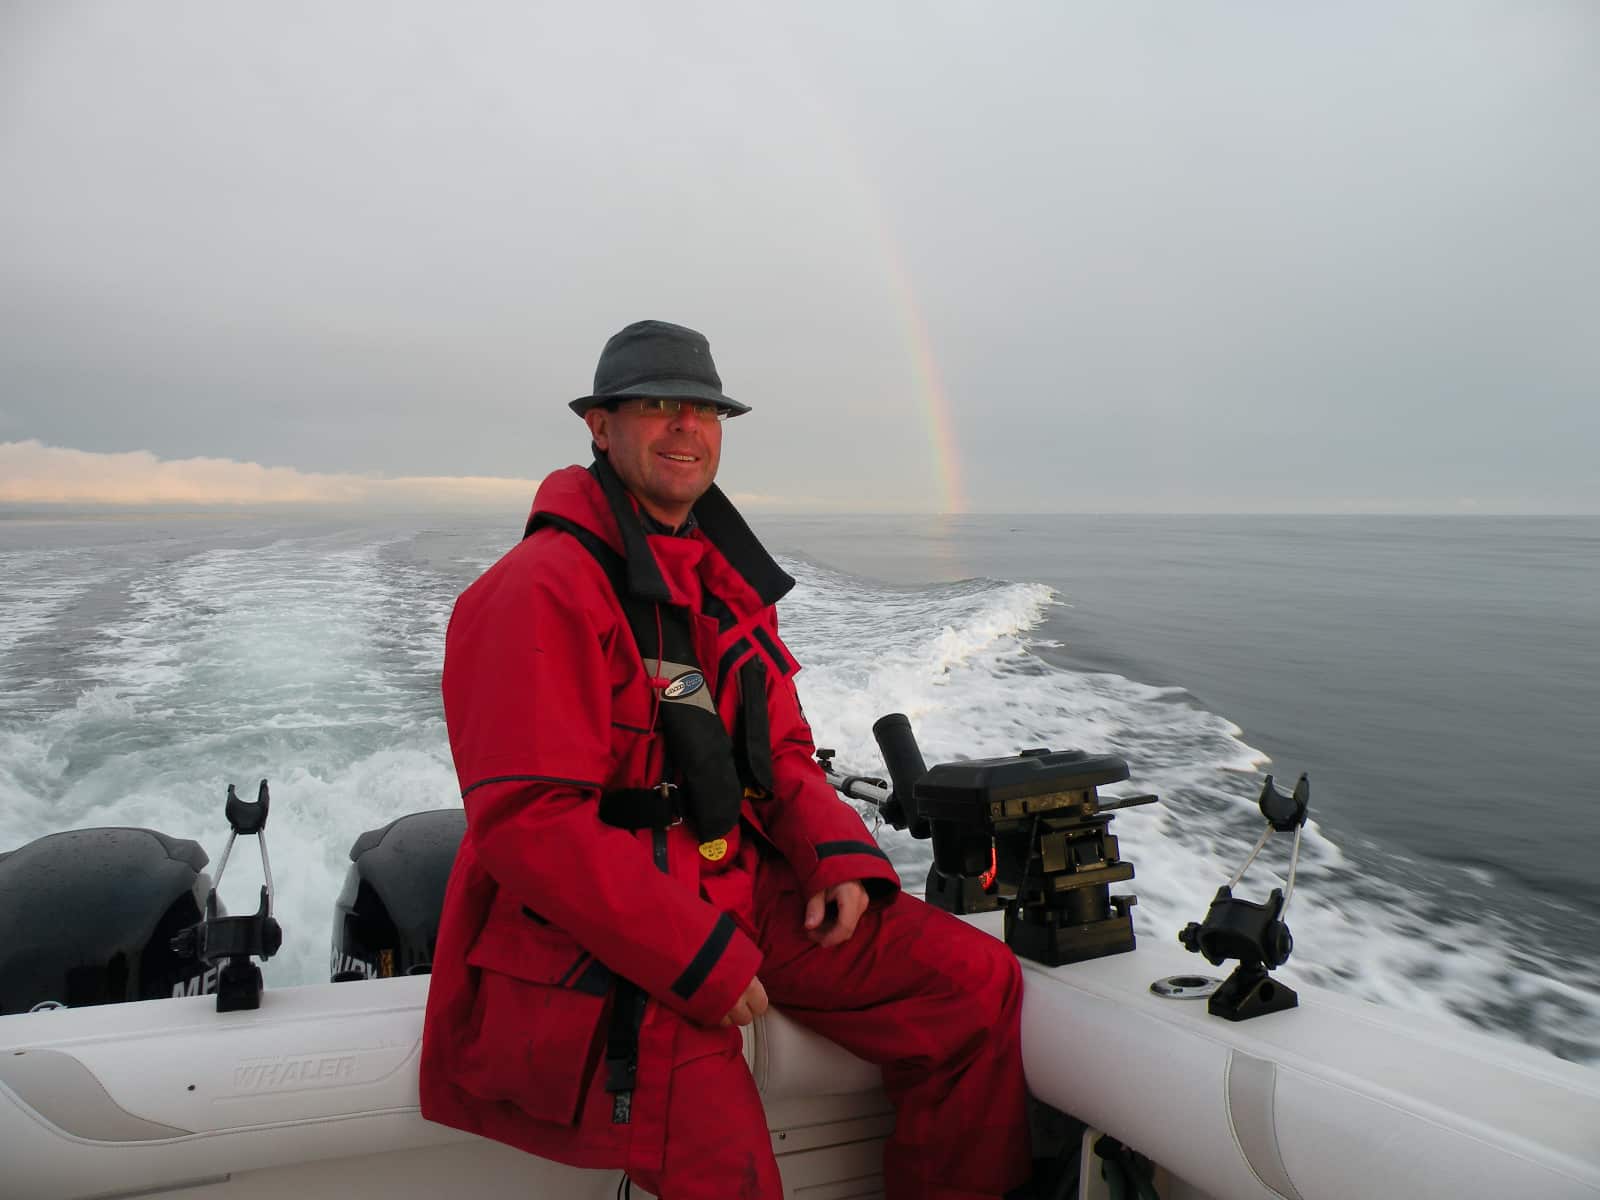 Man in red jacket sitting on boat with rainbow in background